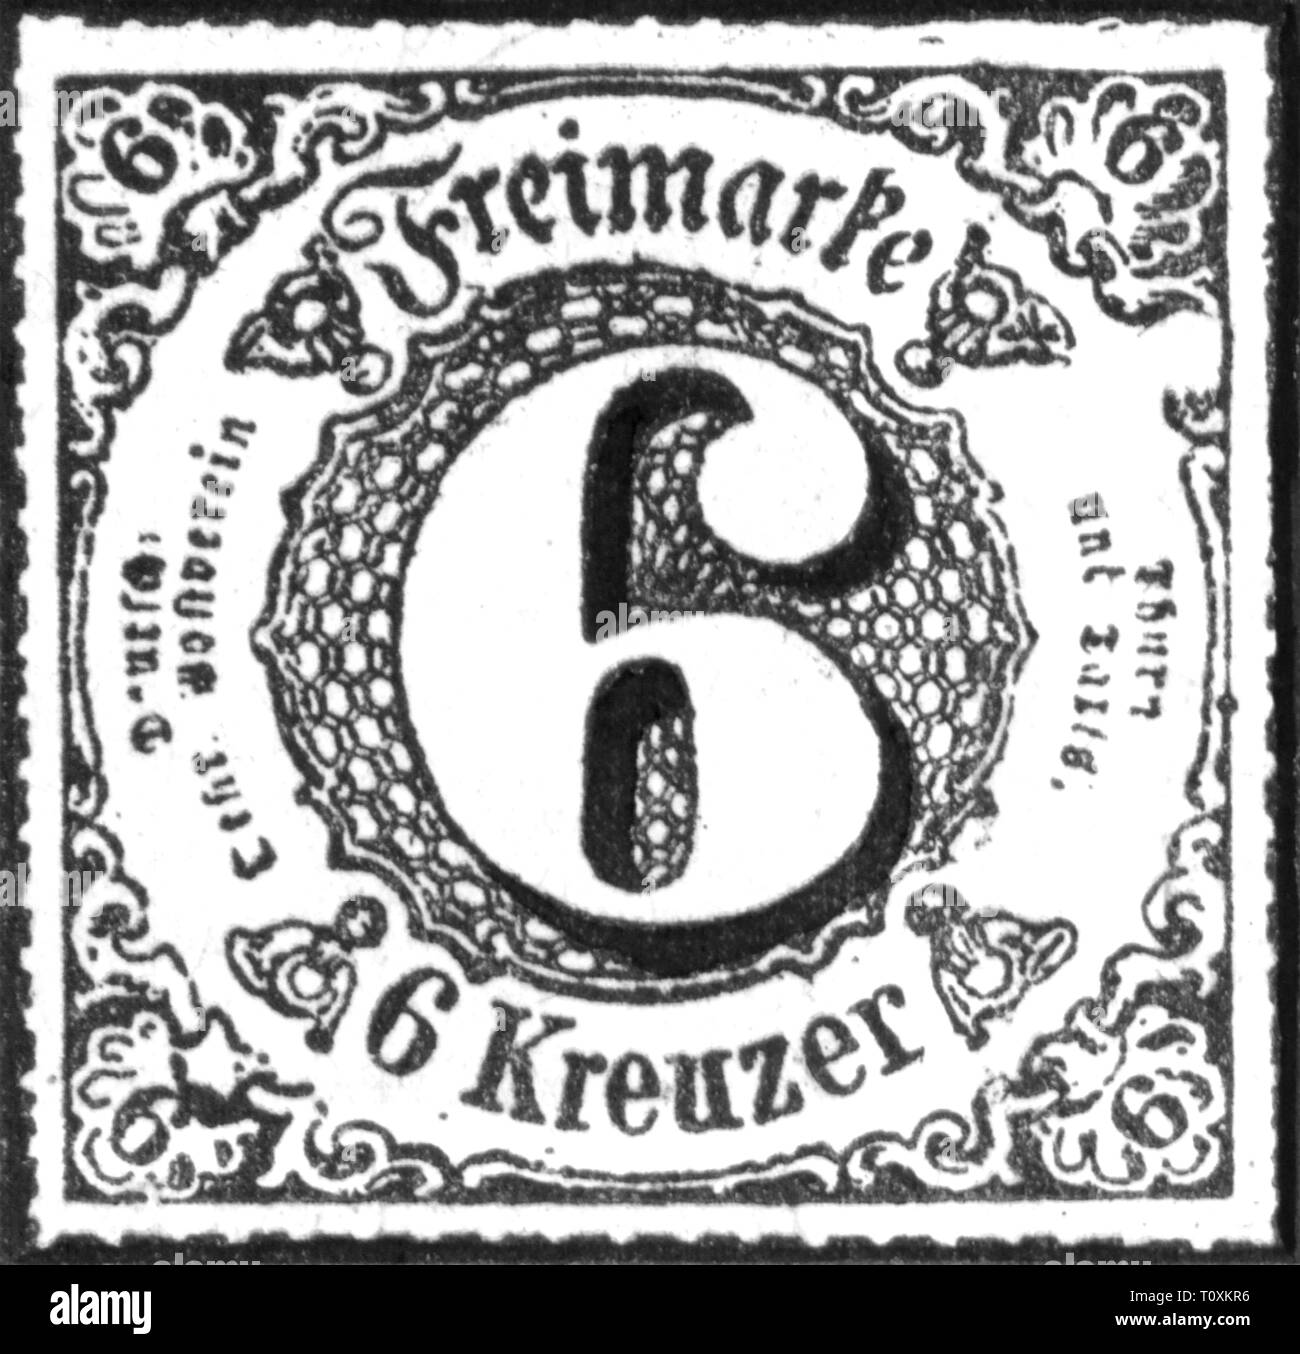 Mail, francobolli, Germania, Thurn-und-Taxis-Post, 6 Kreuzer francobollo, quartiere meridionale, 1866 Additional-Rights-Clearance-Info-Not-Available Foto Stock